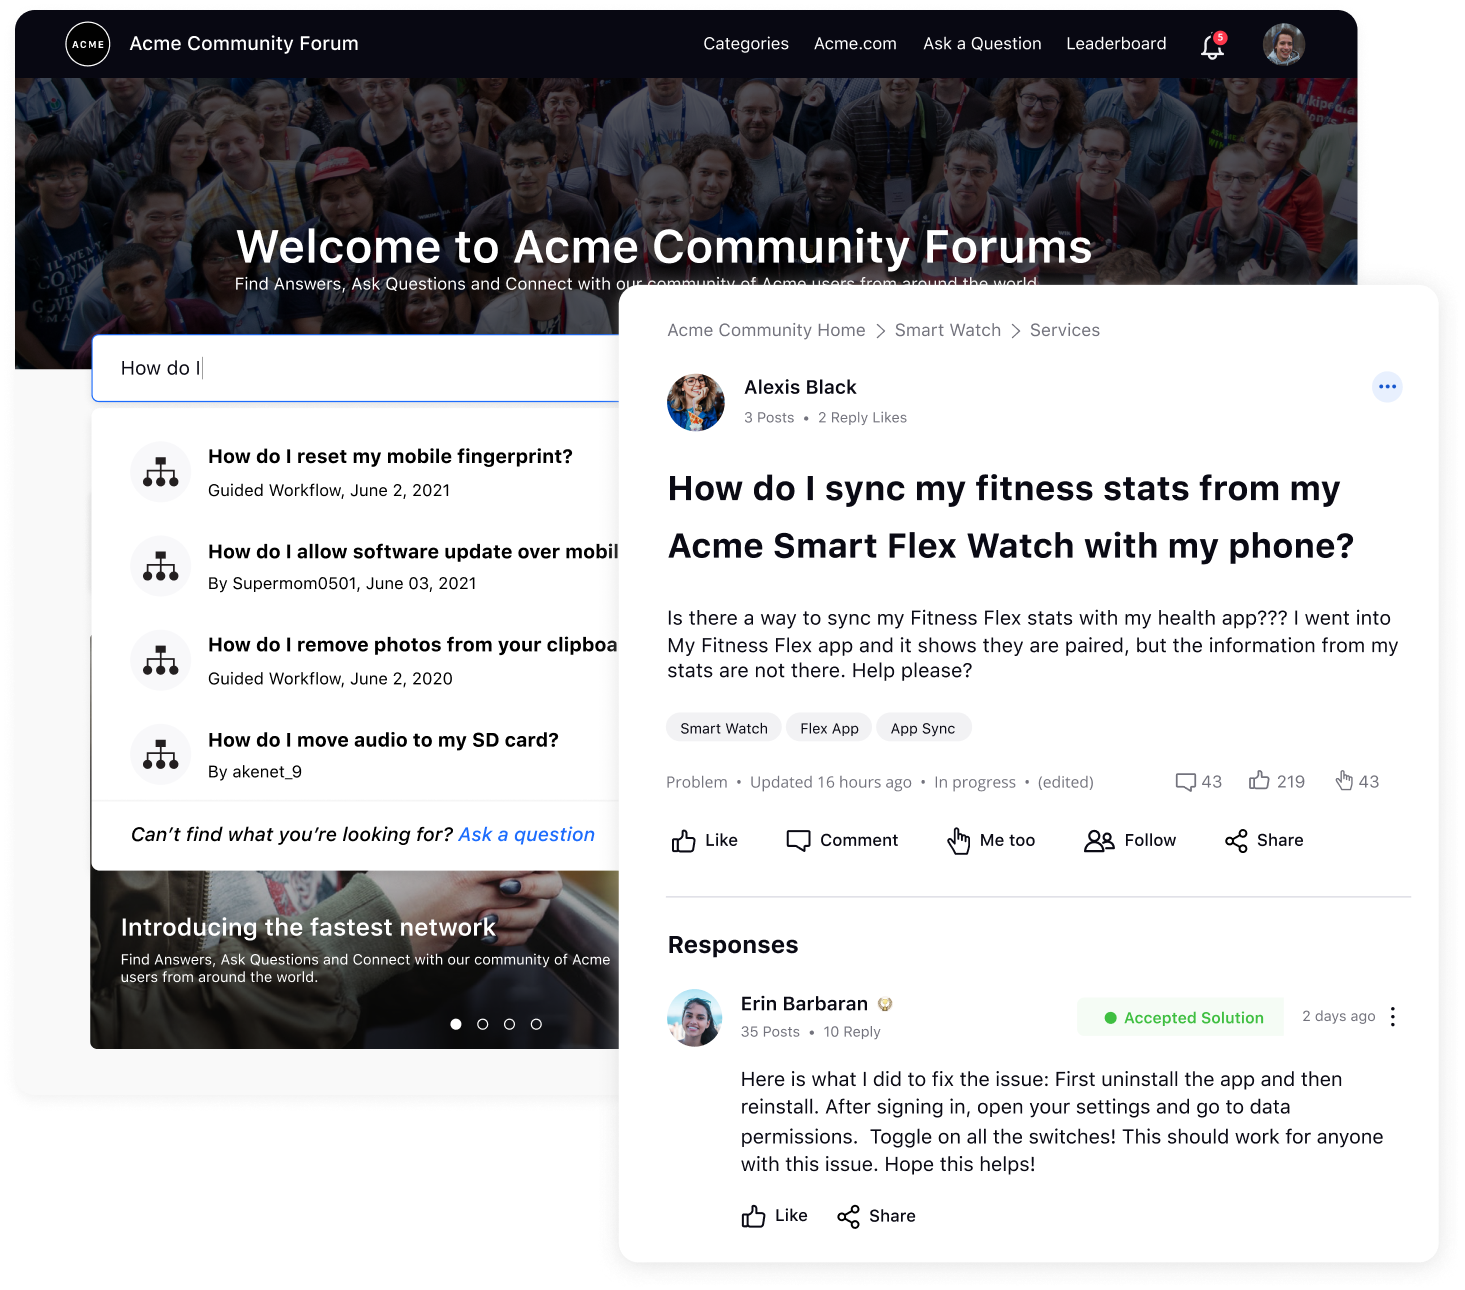 Screenshot of Acme Community Forums for customers to post and find common questions amongst the community forums